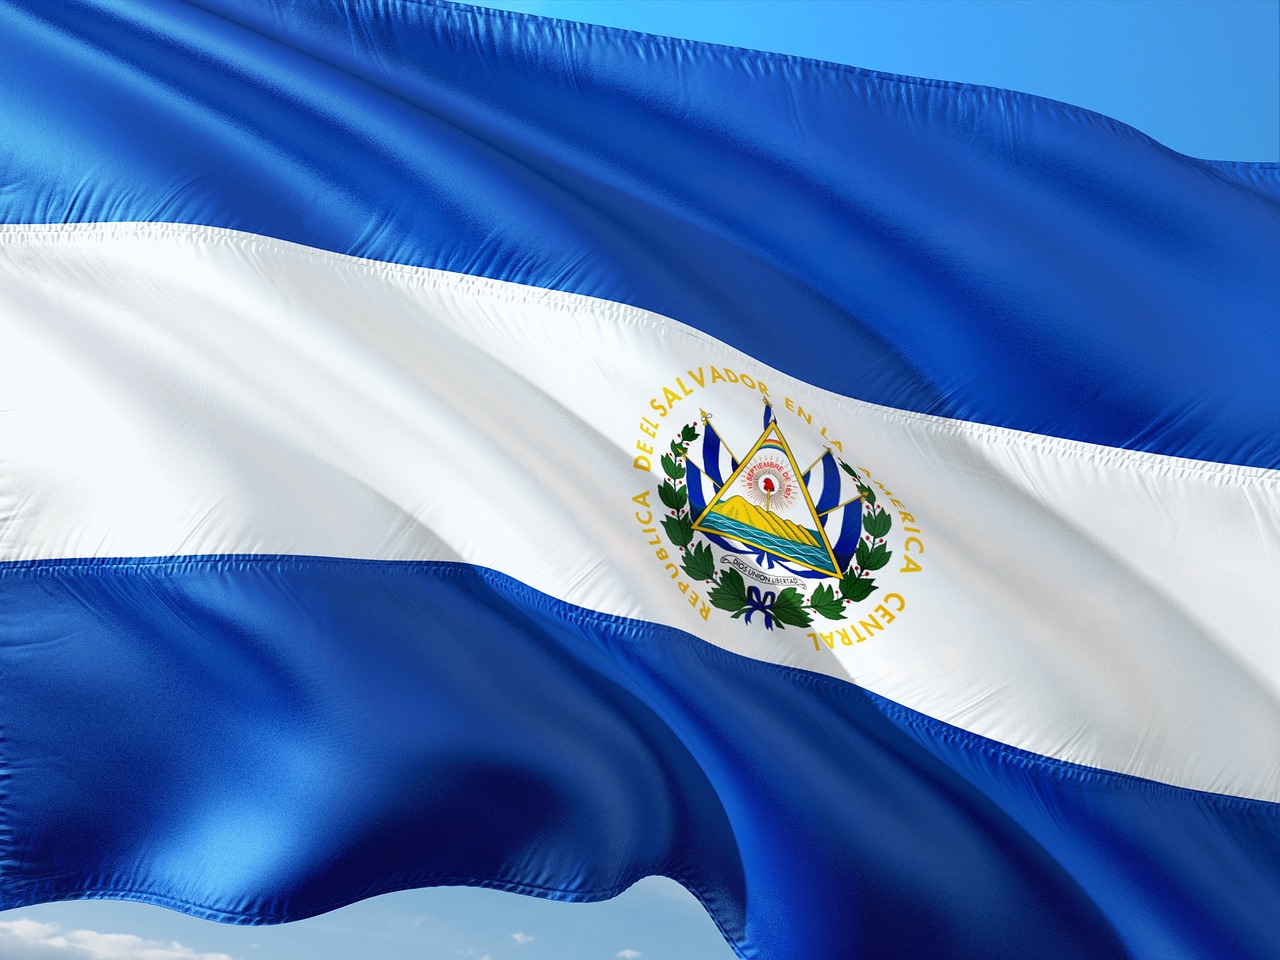 From The Ground, El Salvador's flag